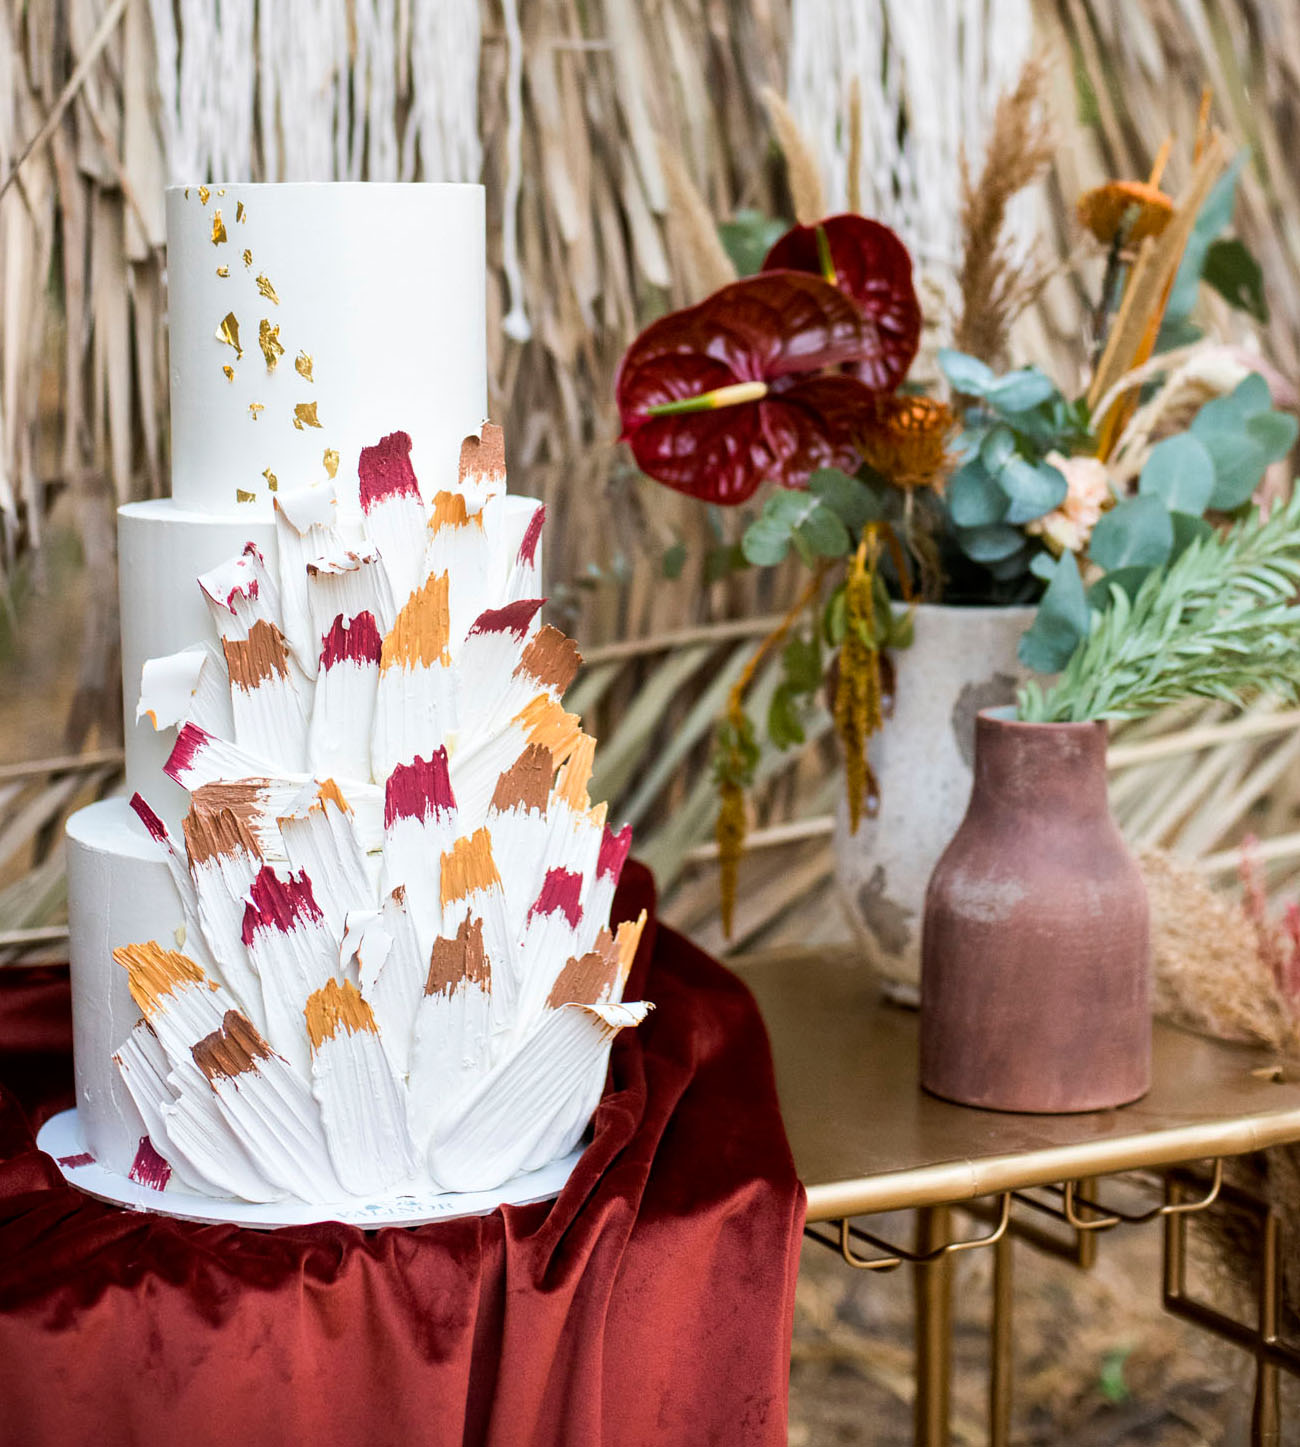 The wedding cake was decorated with colorful brushstrokes